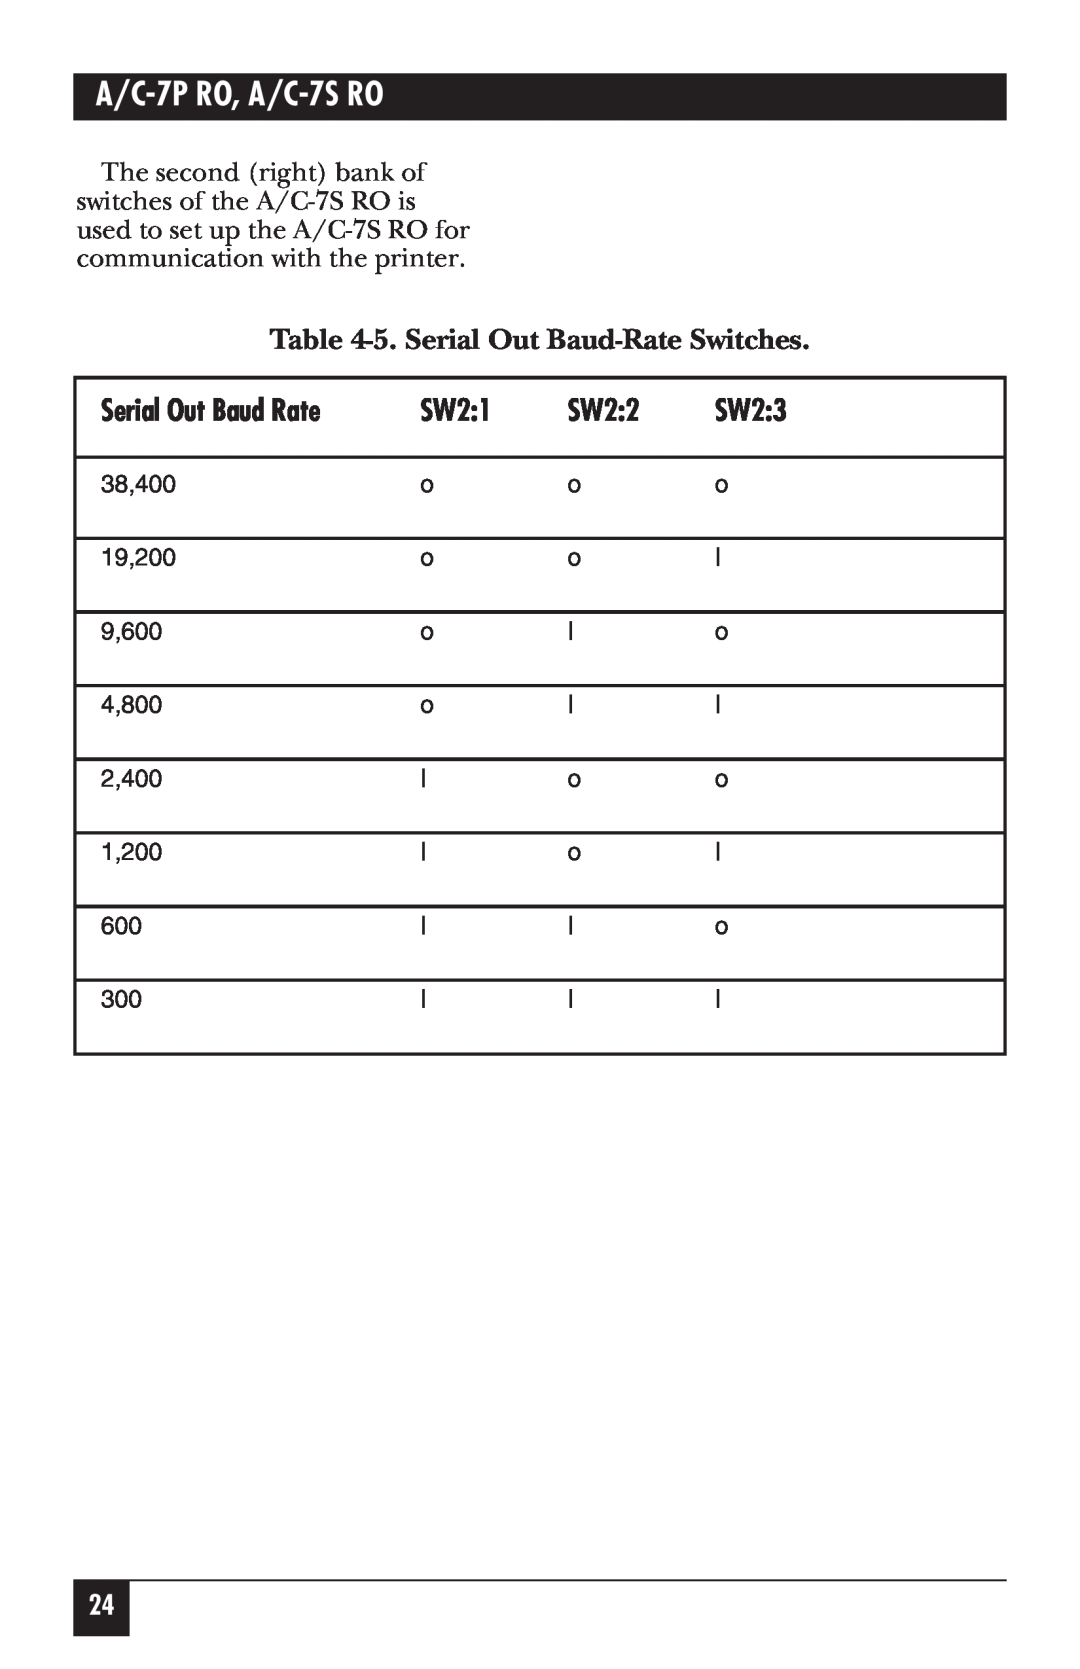 Black Box manual 5. Serial Out Baud-Rate Switches, SW21, SW22, SW23, A/C-7P RO, A/C-7S RO, Serial Out Baud Rate 